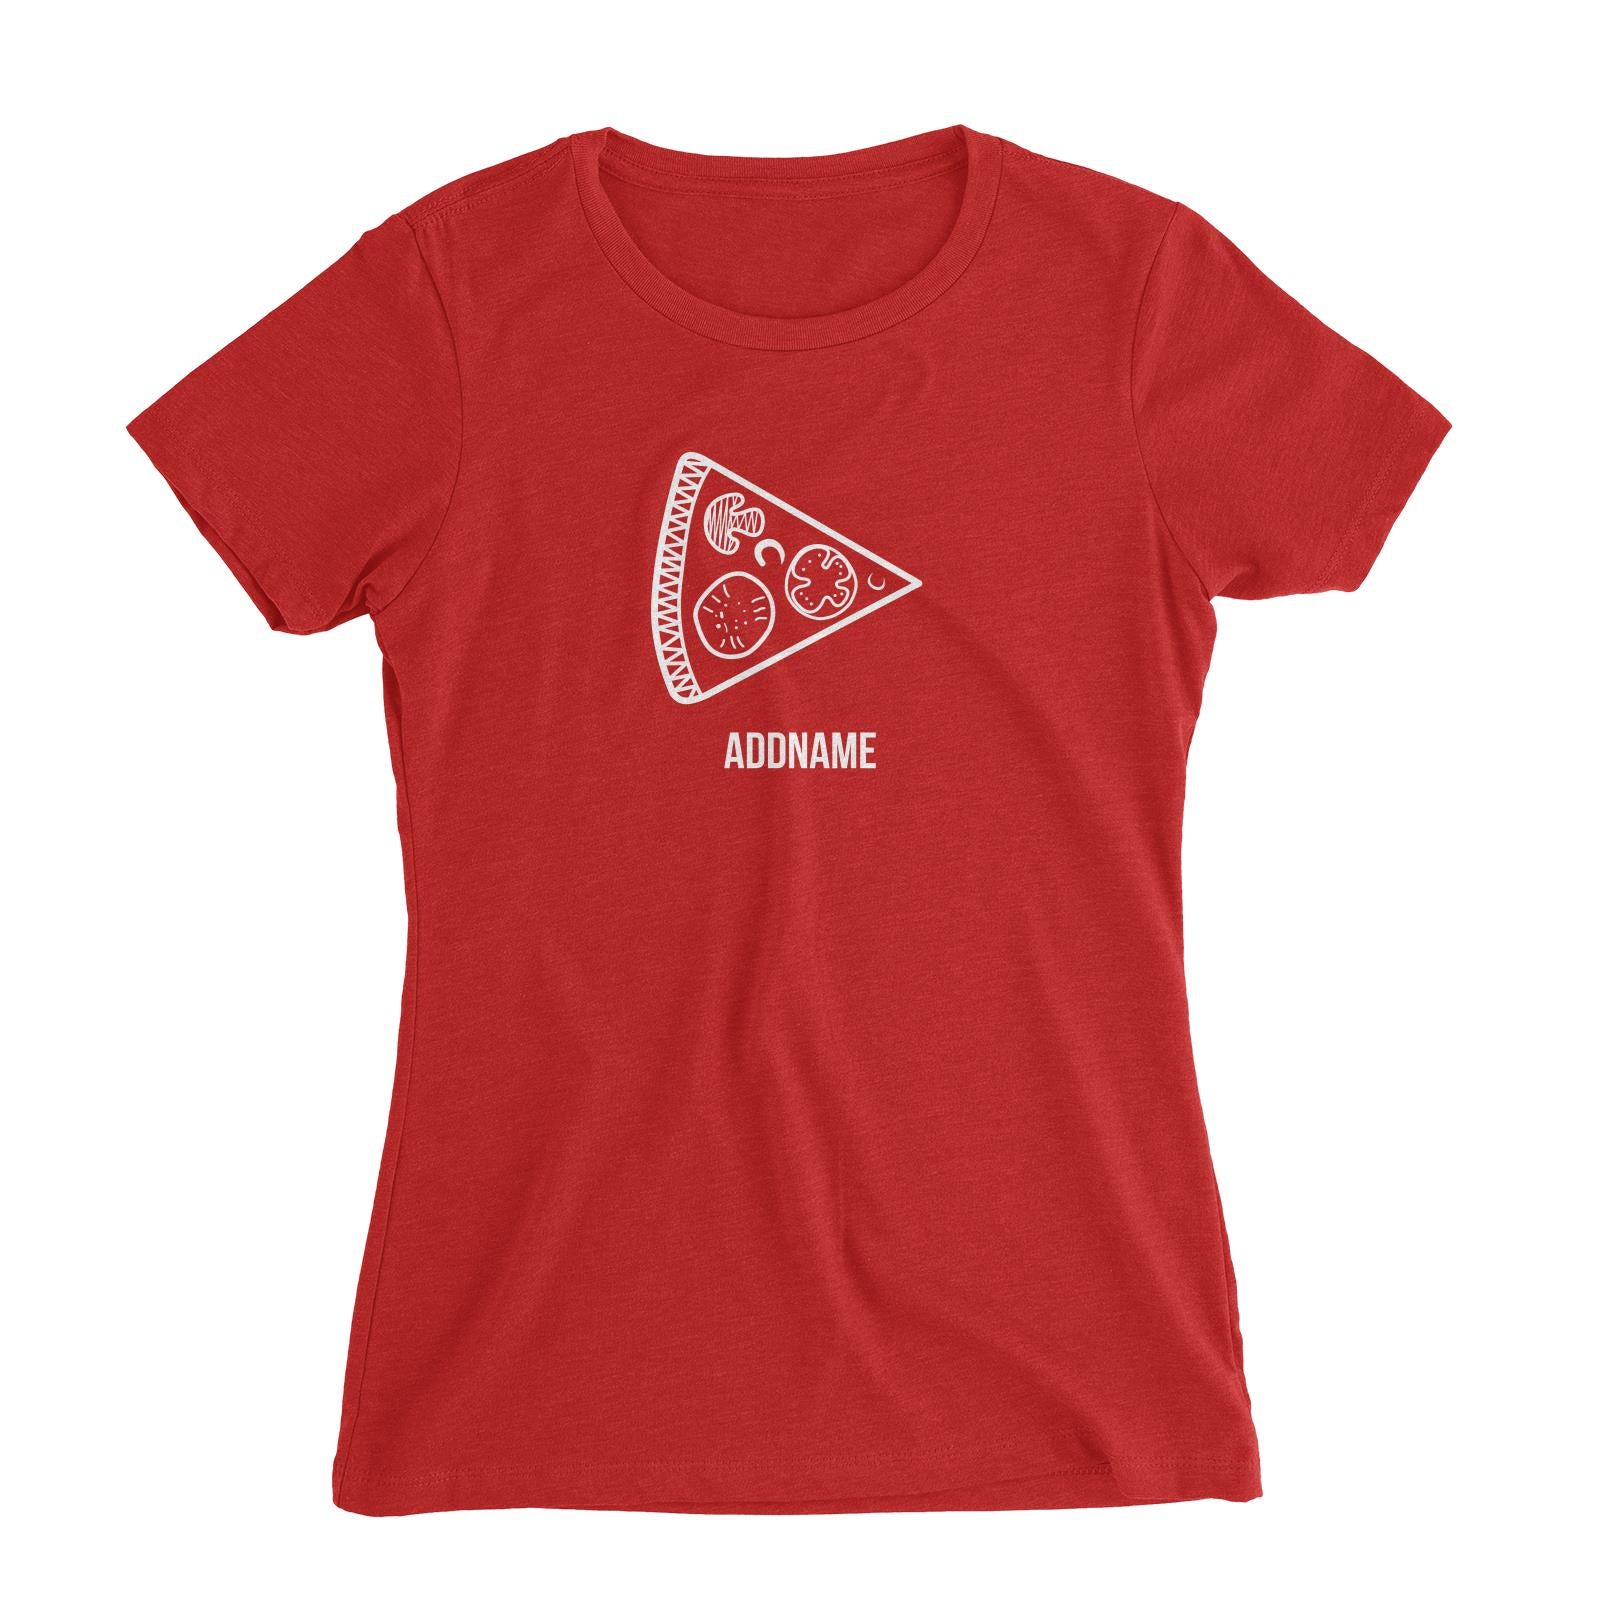 Couple Series Pizza Slice Addname Women Slim Fit T-Shirt